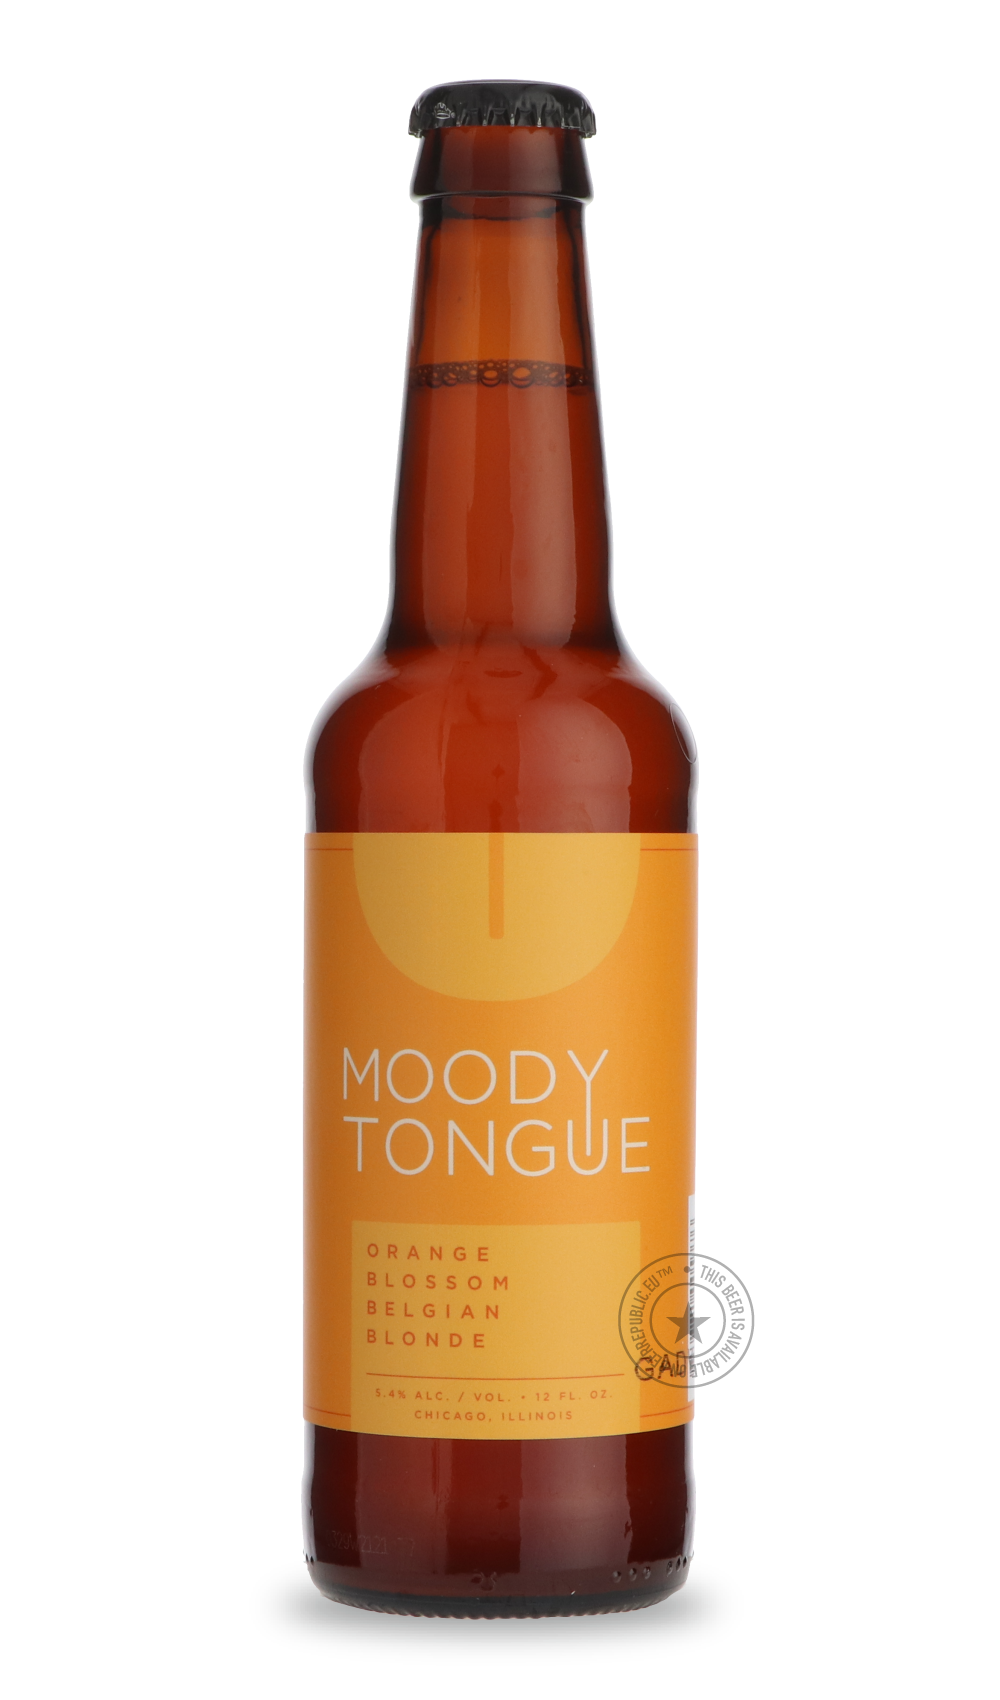 -Moody Tongue- Orange Blossom Belgian Blonde-Pale- Only @ Beer Republic - The best online beer store for American & Canadian craft beer - Buy beer online from the USA and Canada - Bier online kopen - Amerikaans bier kopen - Craft beer store - Craft beer kopen - Amerikanisch bier kaufen - Bier online kaufen - Acheter biere online - IPA - Stout - Porter - New England IPA - Hazy IPA - Imperial Stout - Barrel Aged - Barrel Aged Imperial Stout - Brown - Dark beer - Blond - Blonde - Pilsner - Lager - Wheat - Weiz